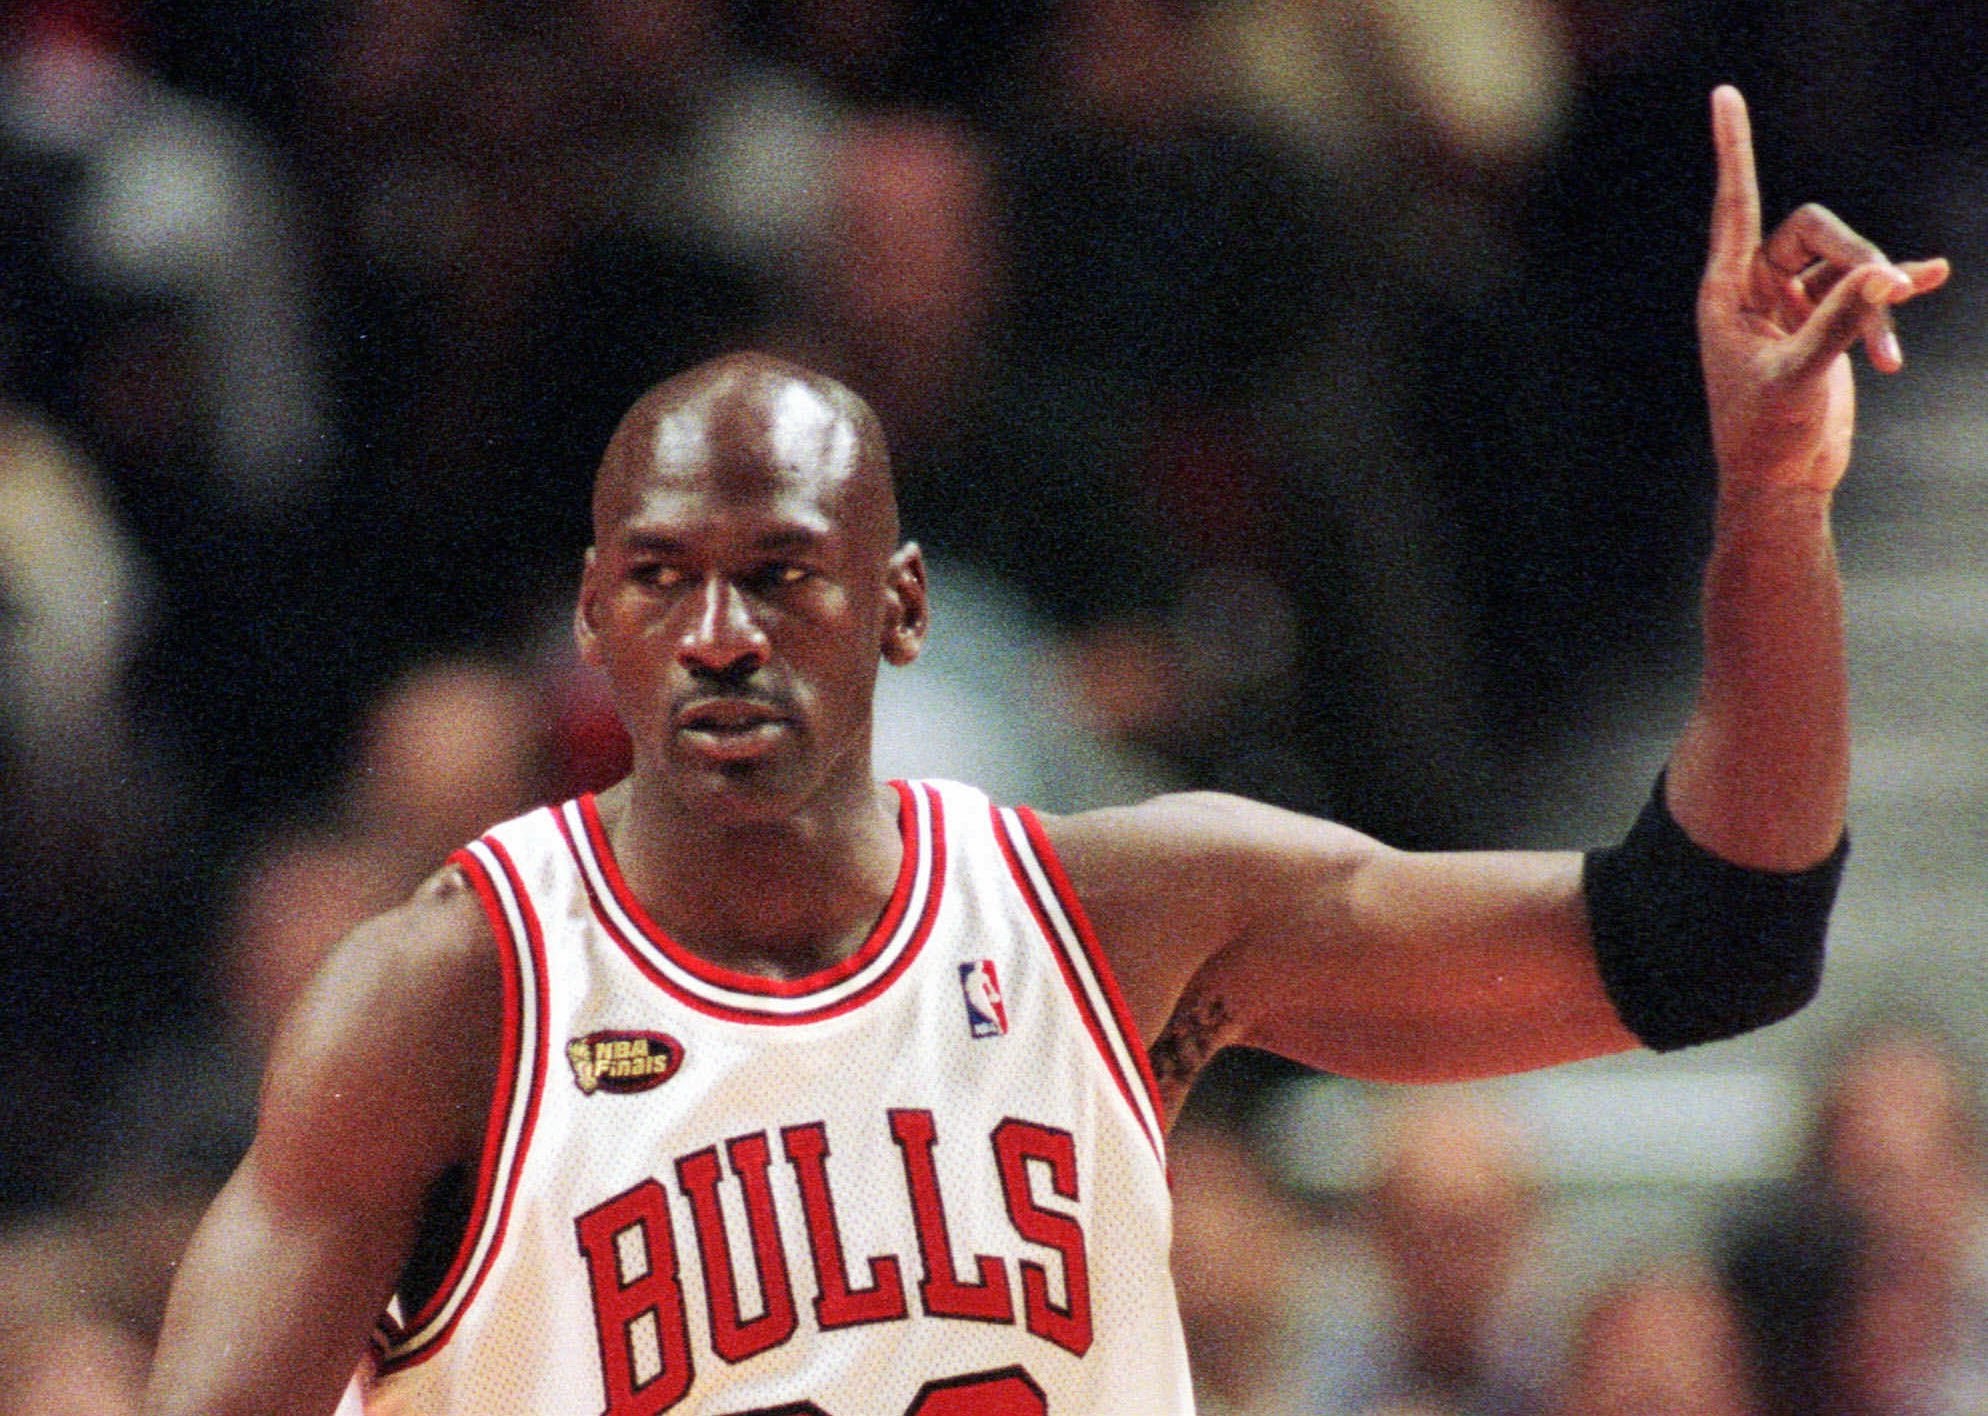 Fast facts on 'The Last Dance' 1997-98 Chicago Bulls